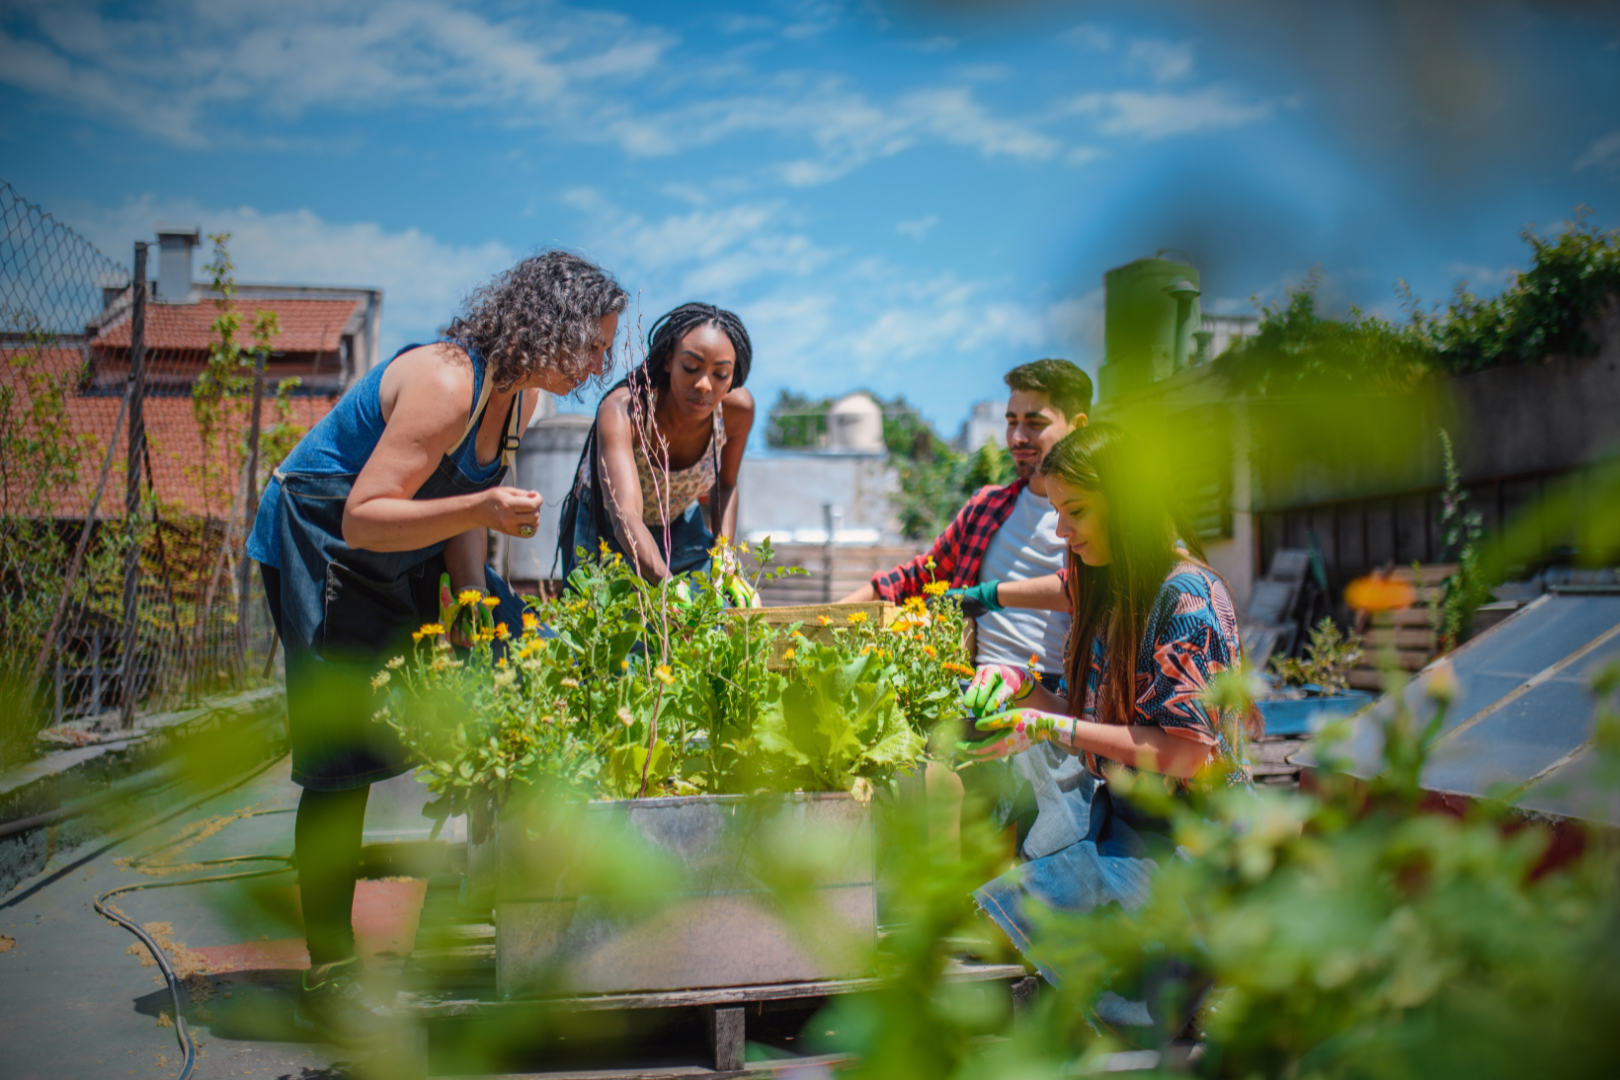 People working together in a community garden (photo credit: Canva)